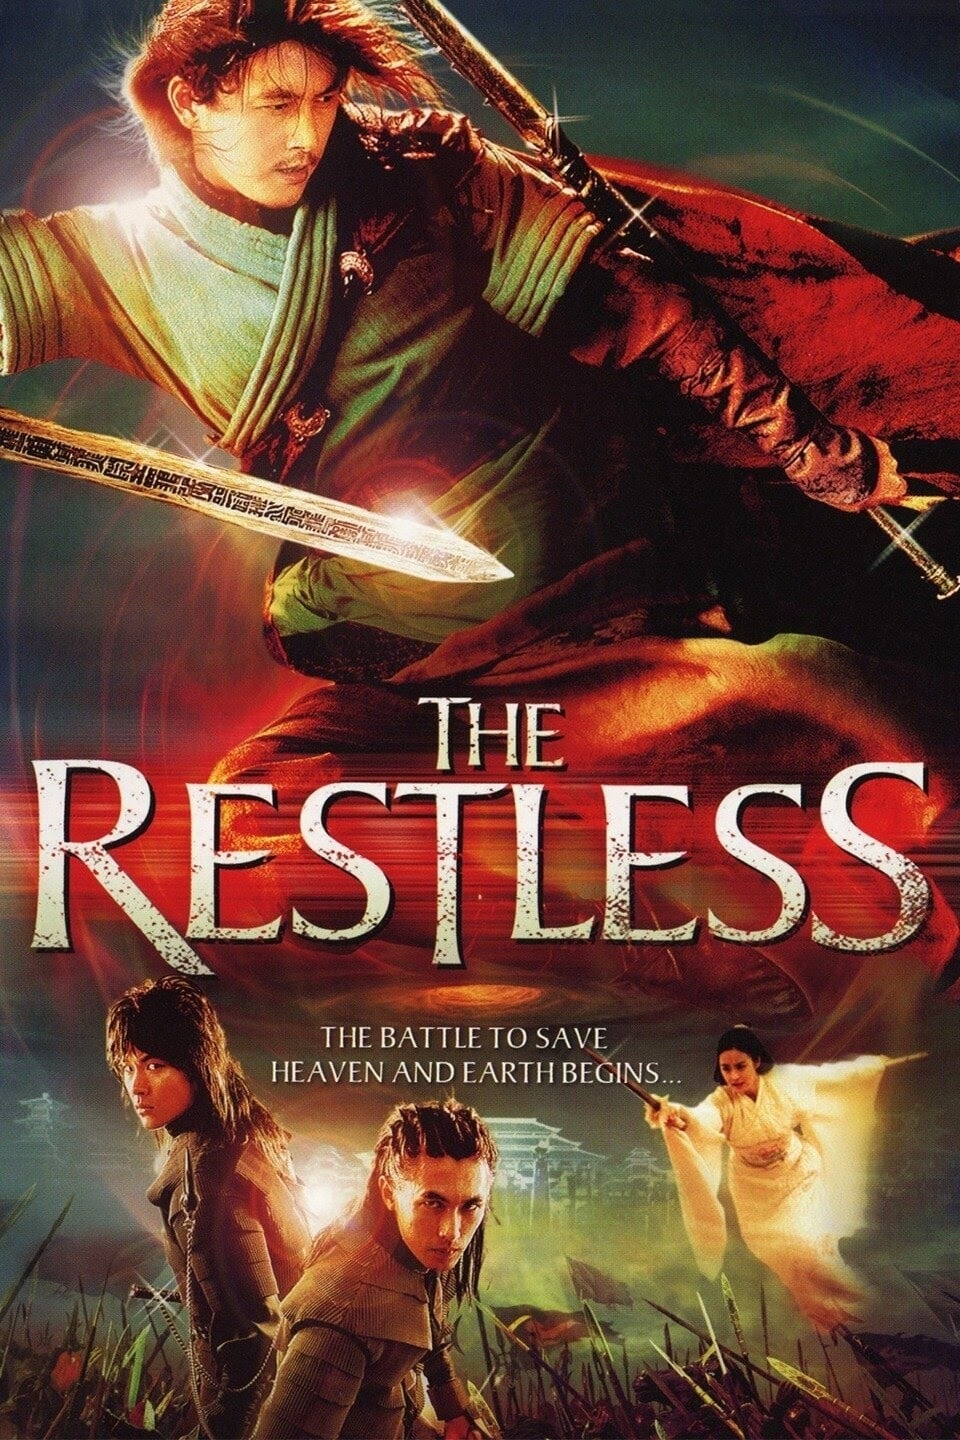 The Restless (2006)